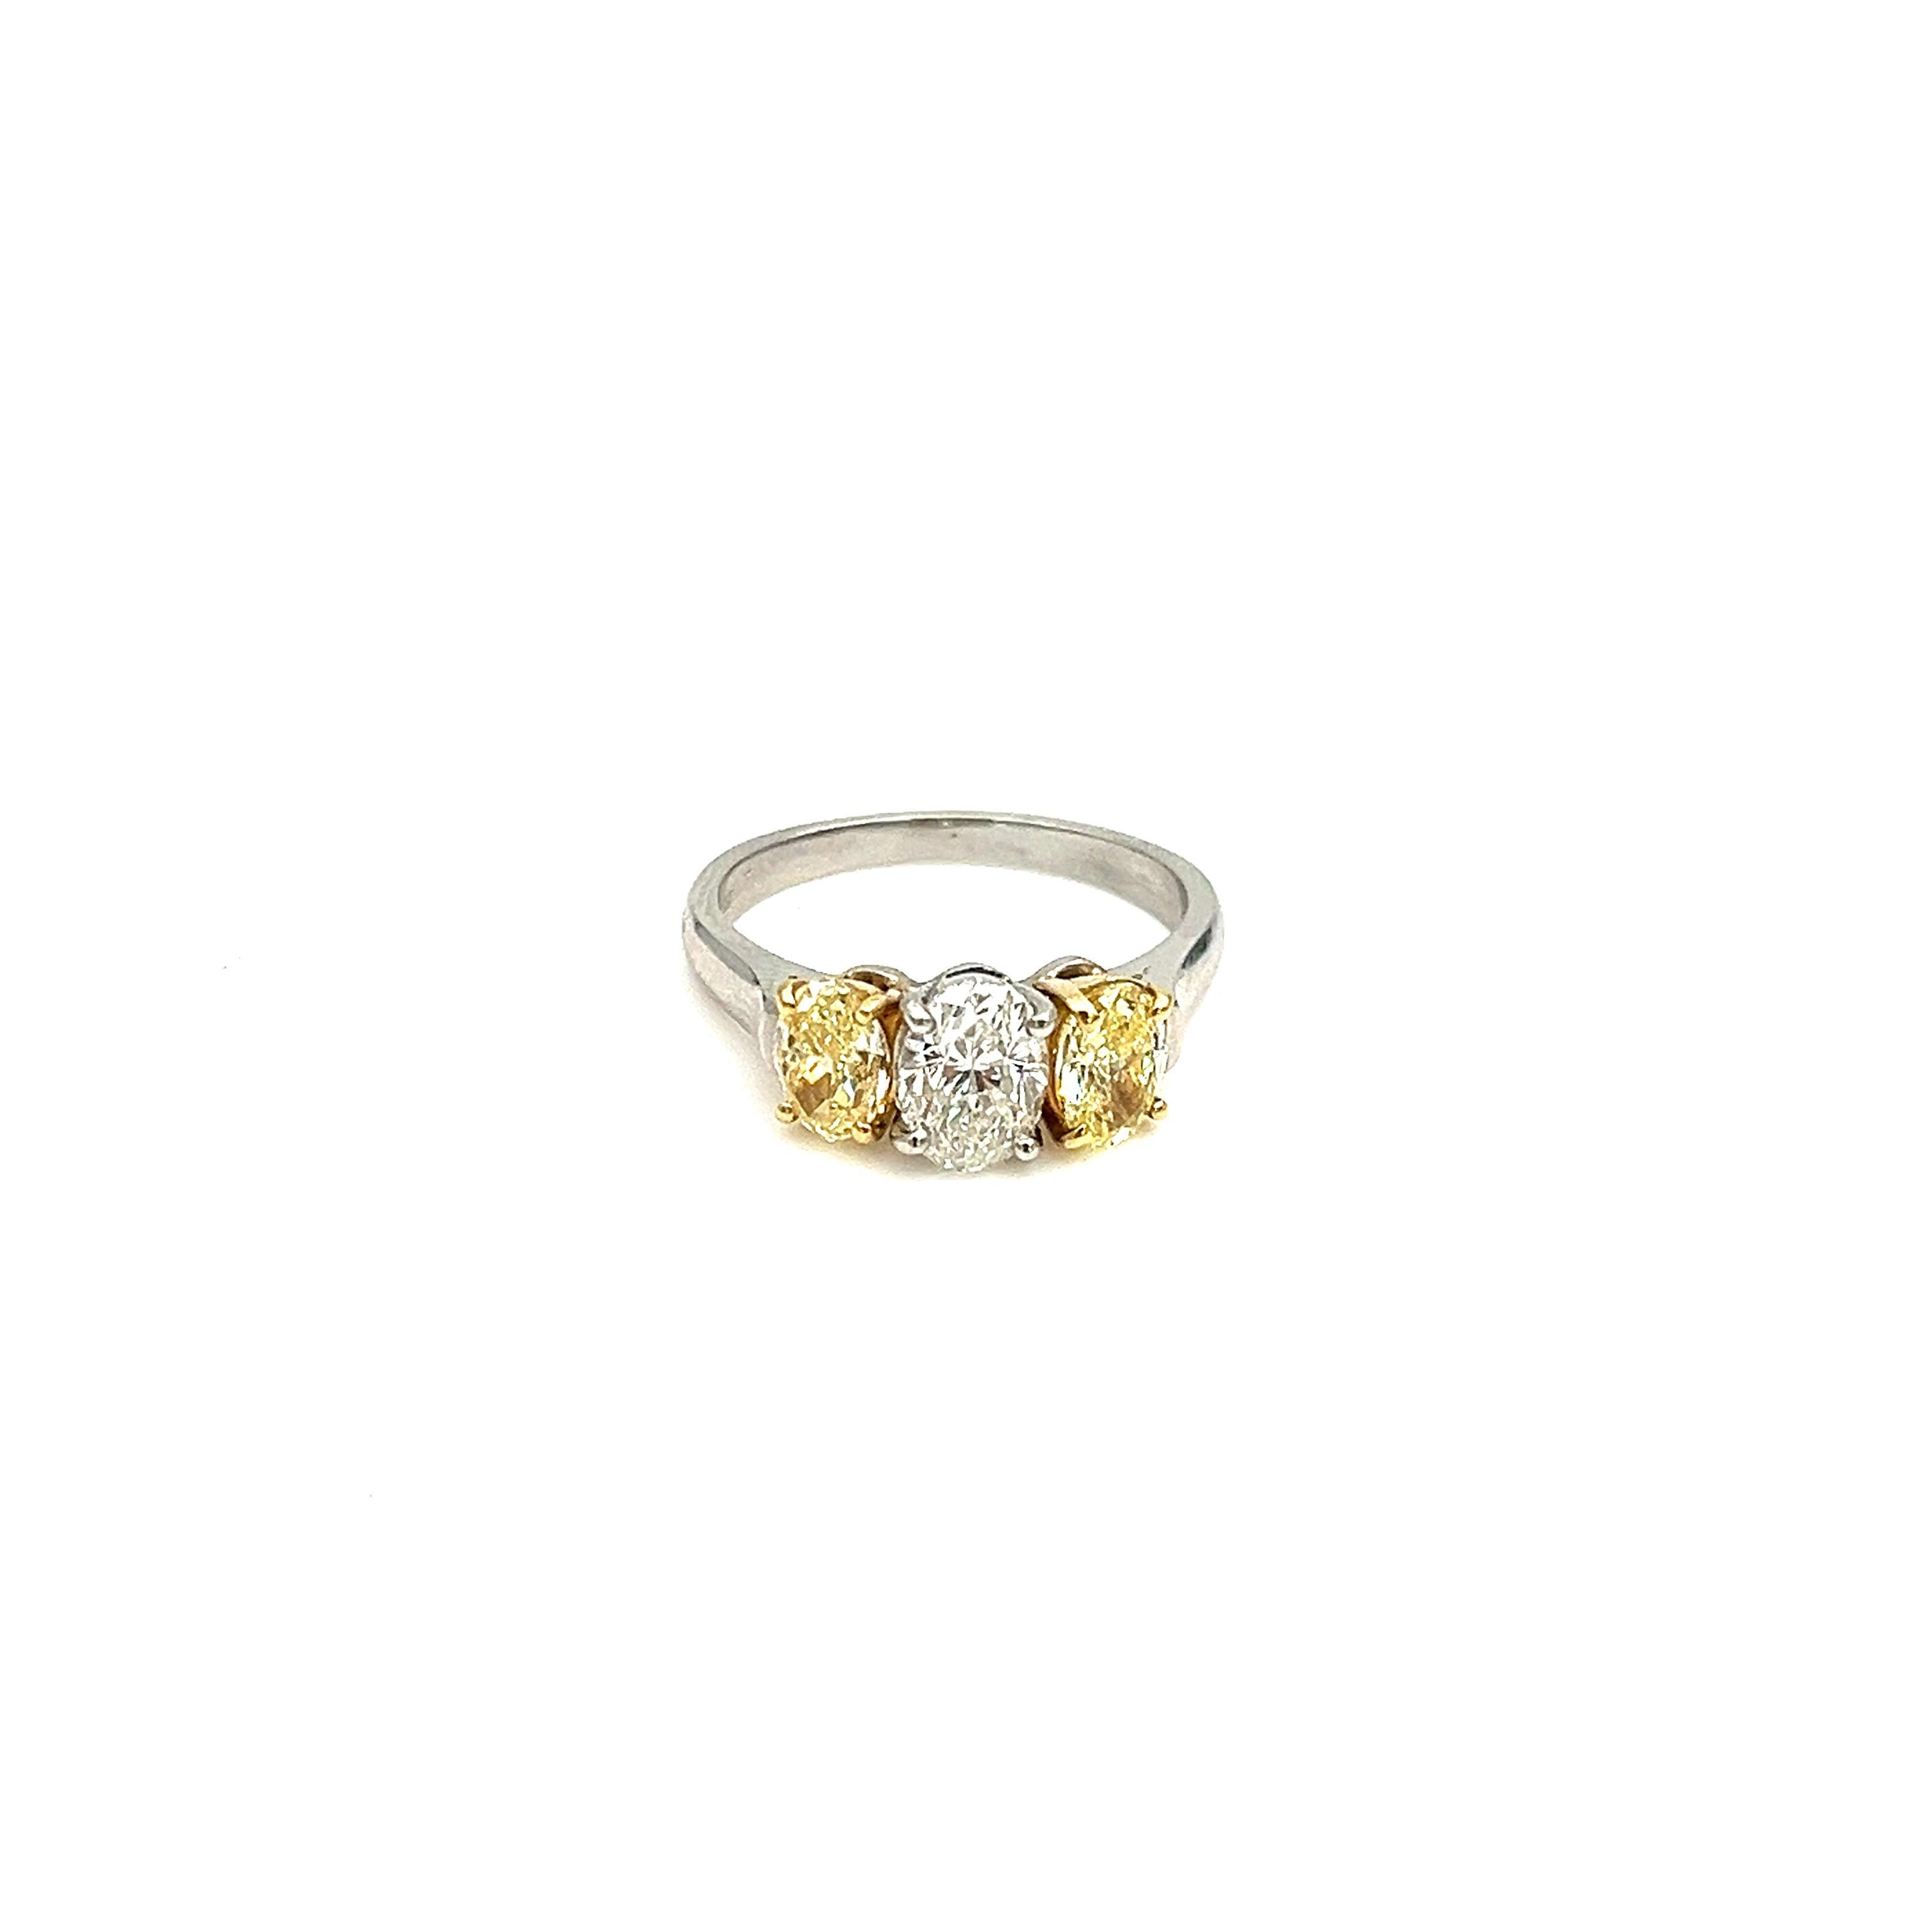 This stunning 2.21-carat three-stone yellow and white diamond ring is the perfect addition to any jewelry collection. The center stone is a beautiful natural yellow diamond weighing .96 Fancy intense yellow accompanied by GIA.  The ring is